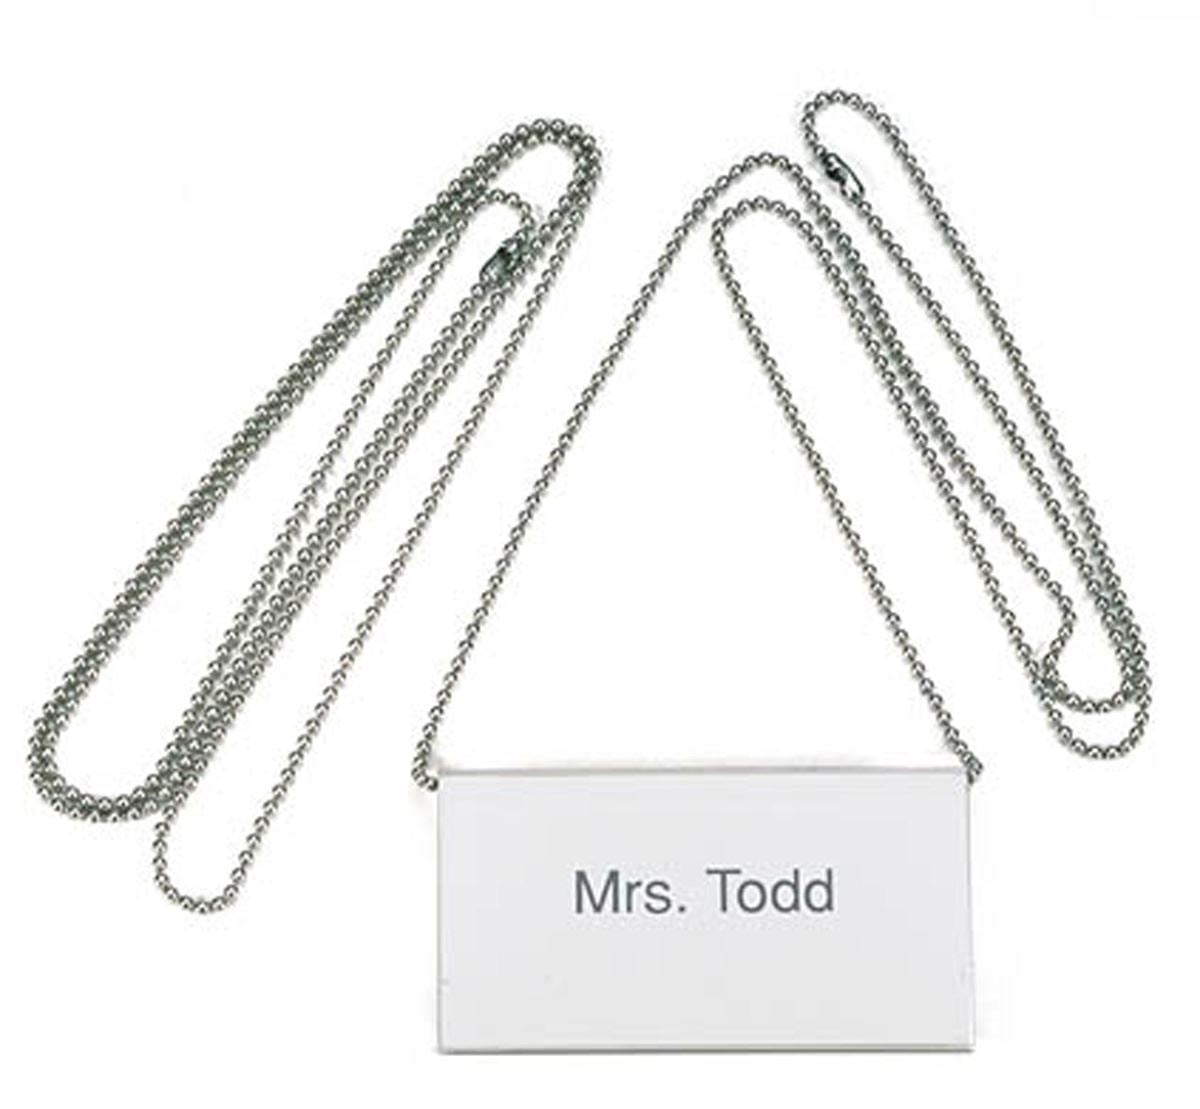 Durable Recycled Steel ID Card Name Badge Chains | 10 Pack | 85cm | Silver